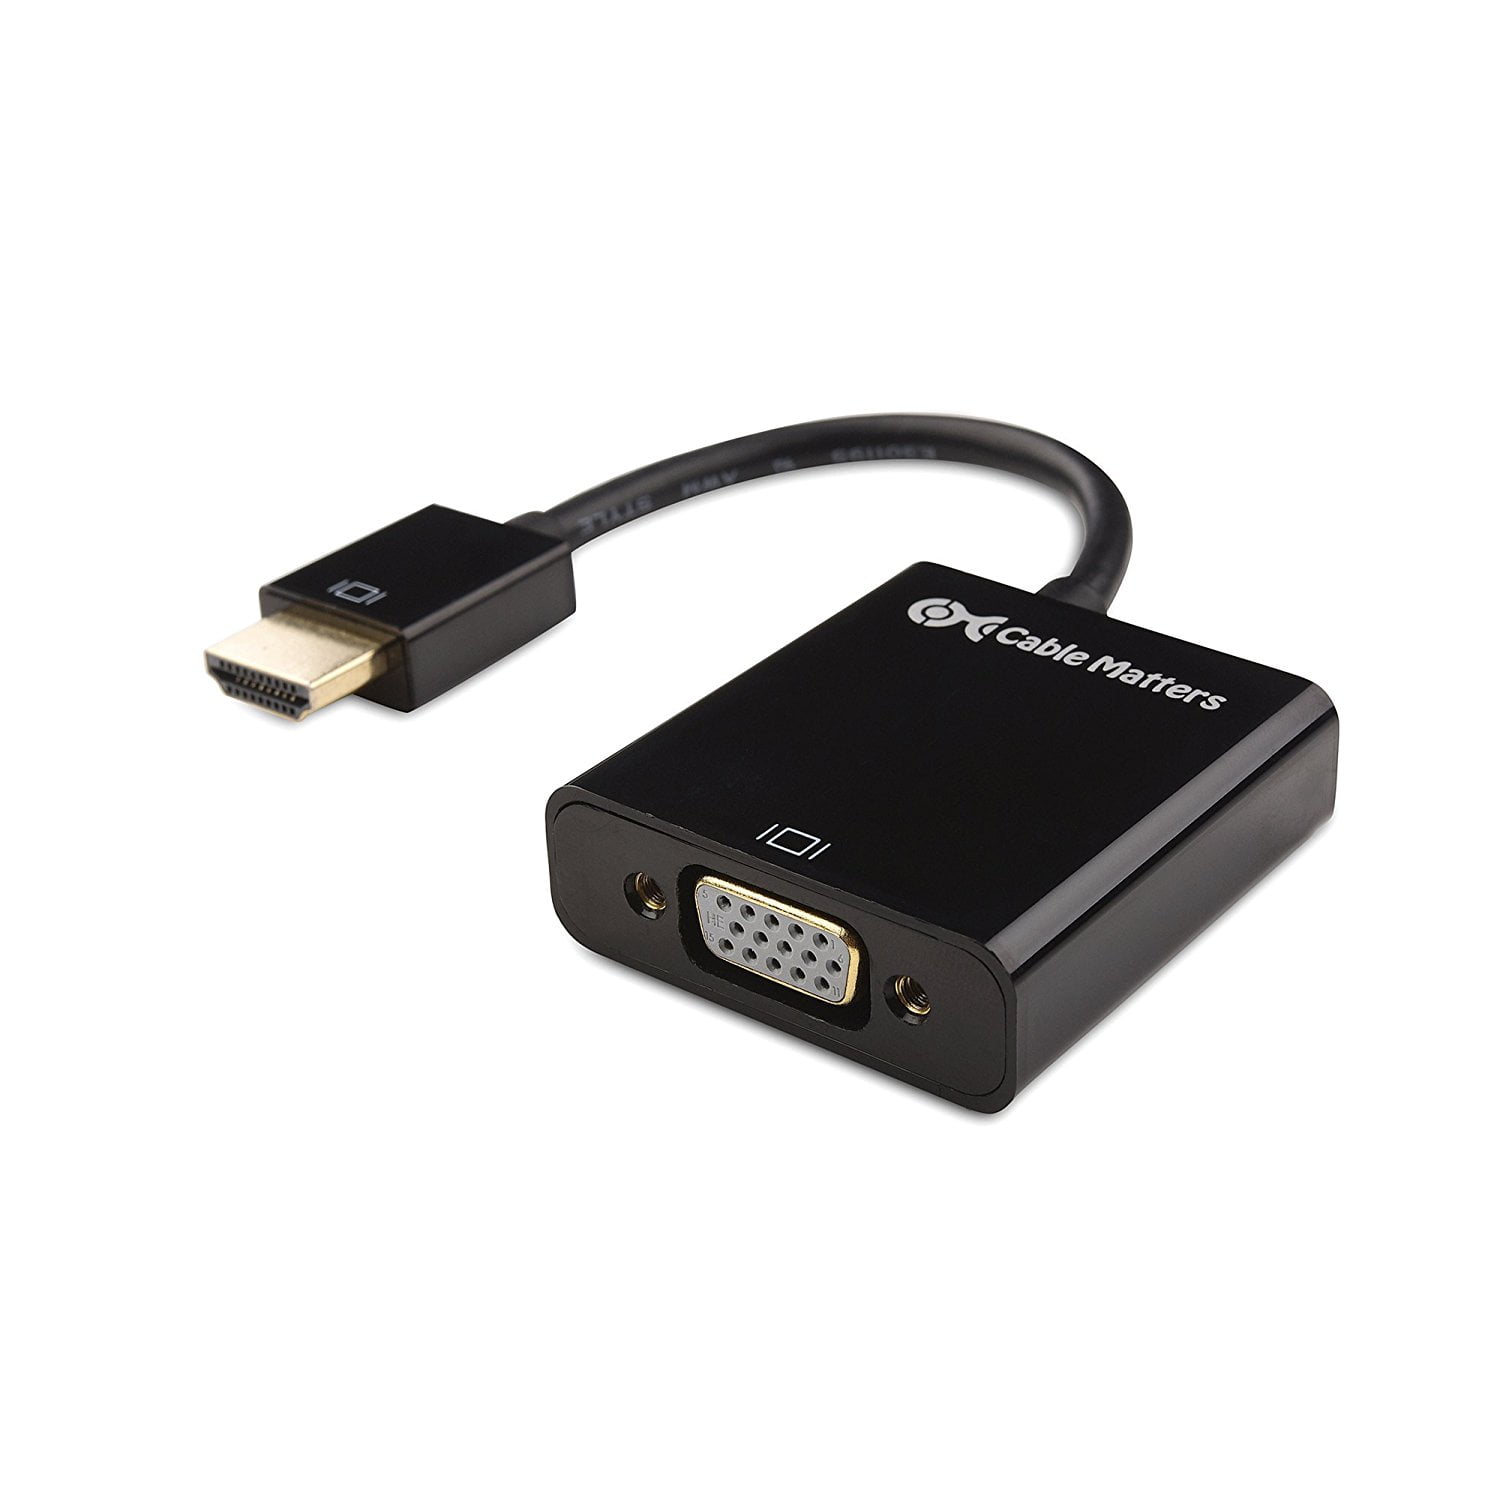 Cable Matters HDMI to VGA Adapter (HDMI to VGA Converter) in Black .